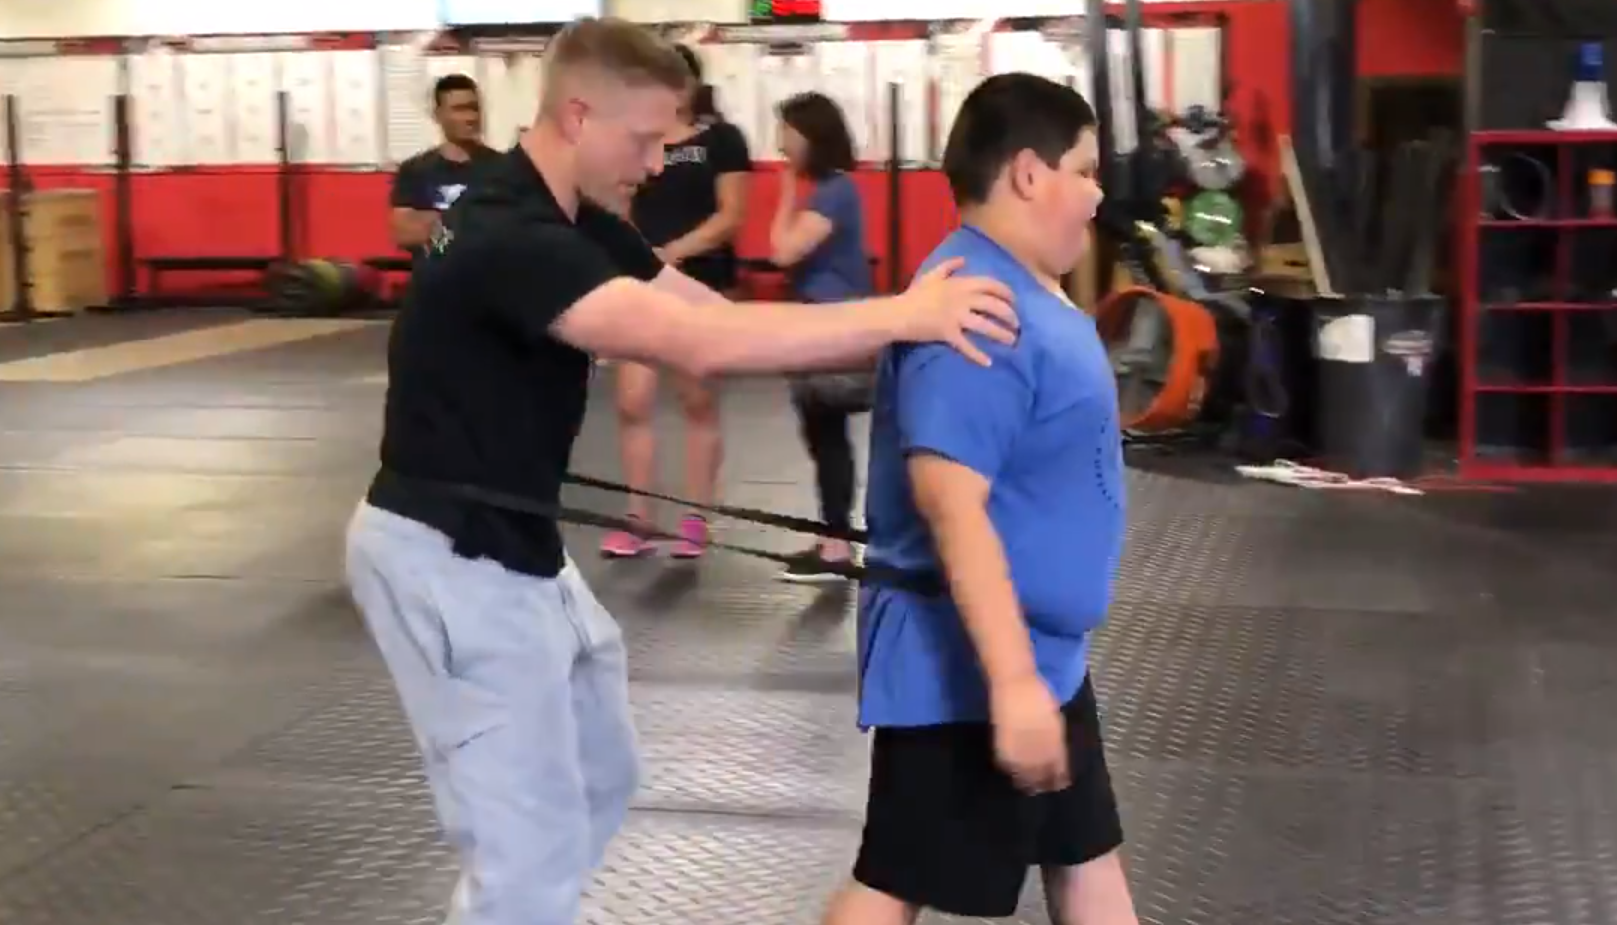 WATCH: Crossfit Training for Kids with Autism Opens in New Bay Area Gym